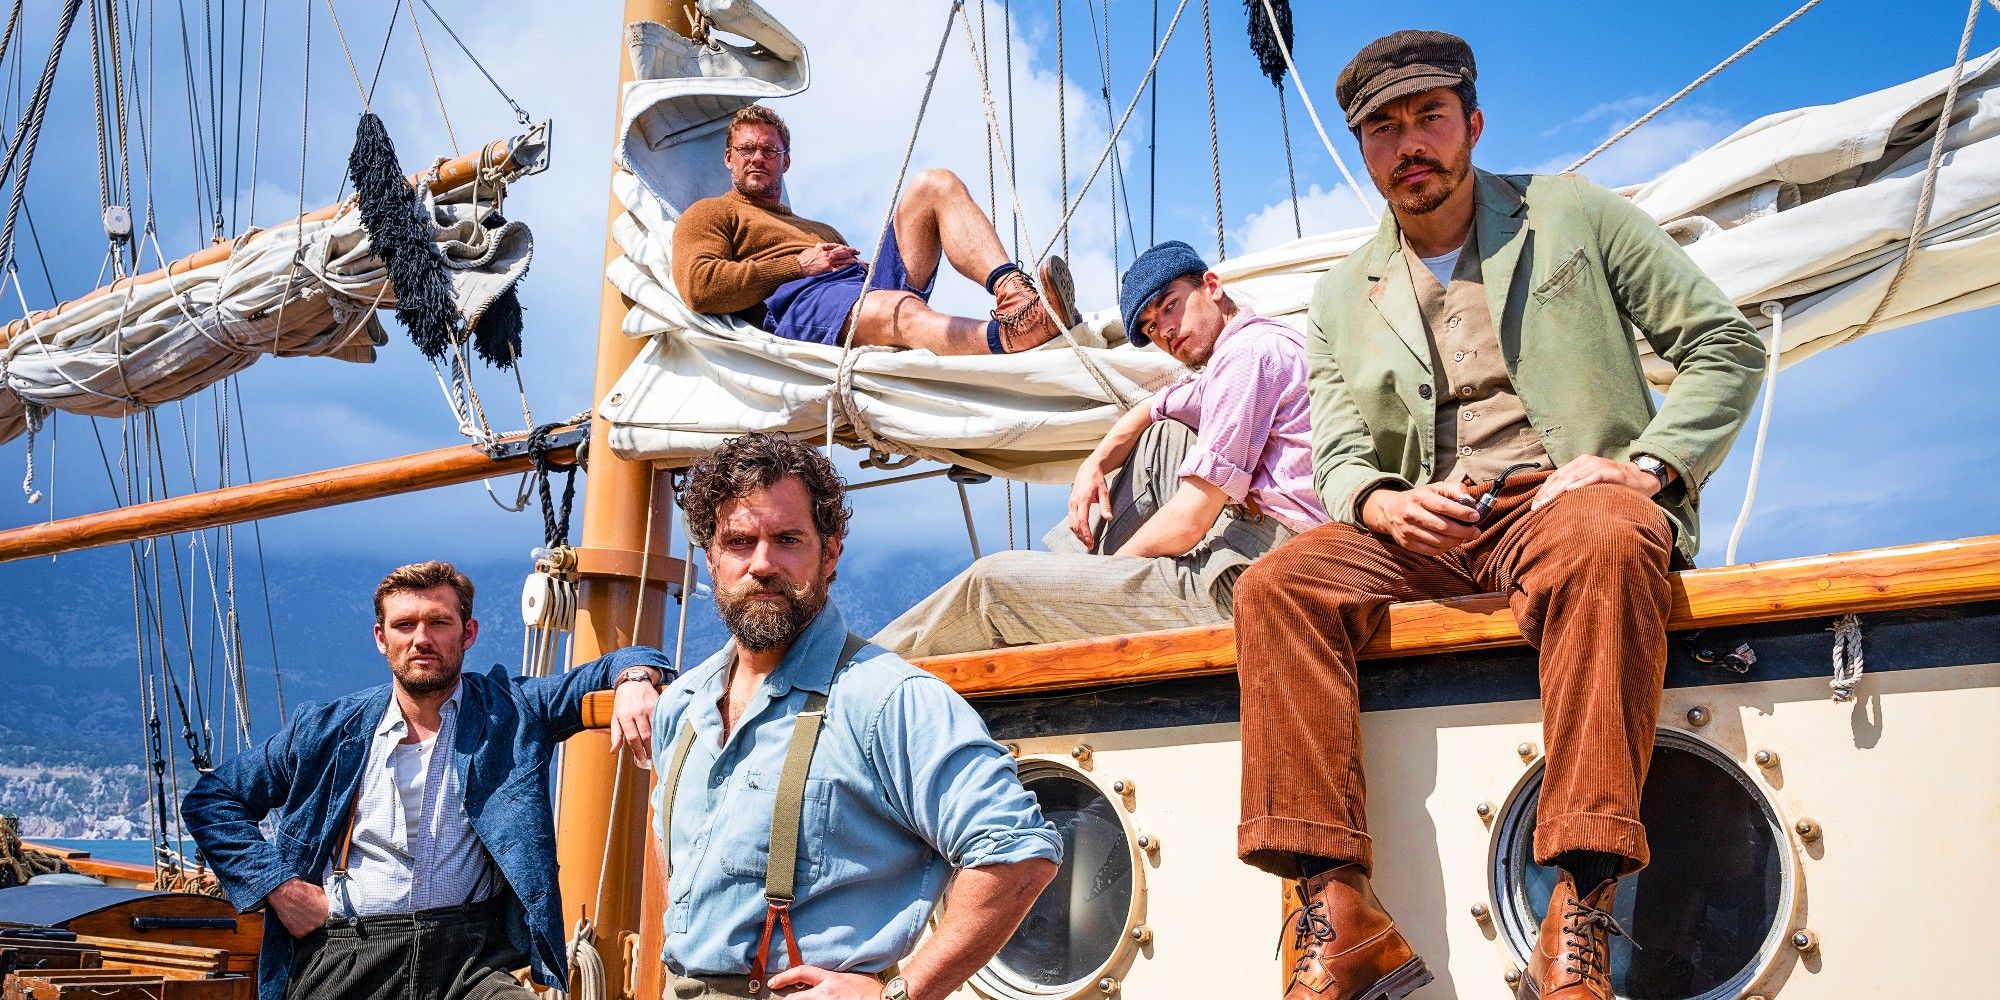 Alex Pettyfer, Alan Ritchson, Henry Cavill, Hero Fiennes Tiffin and Henry Golding On A Sailing Boat In The Ministry of Ungentlemanly Warfare